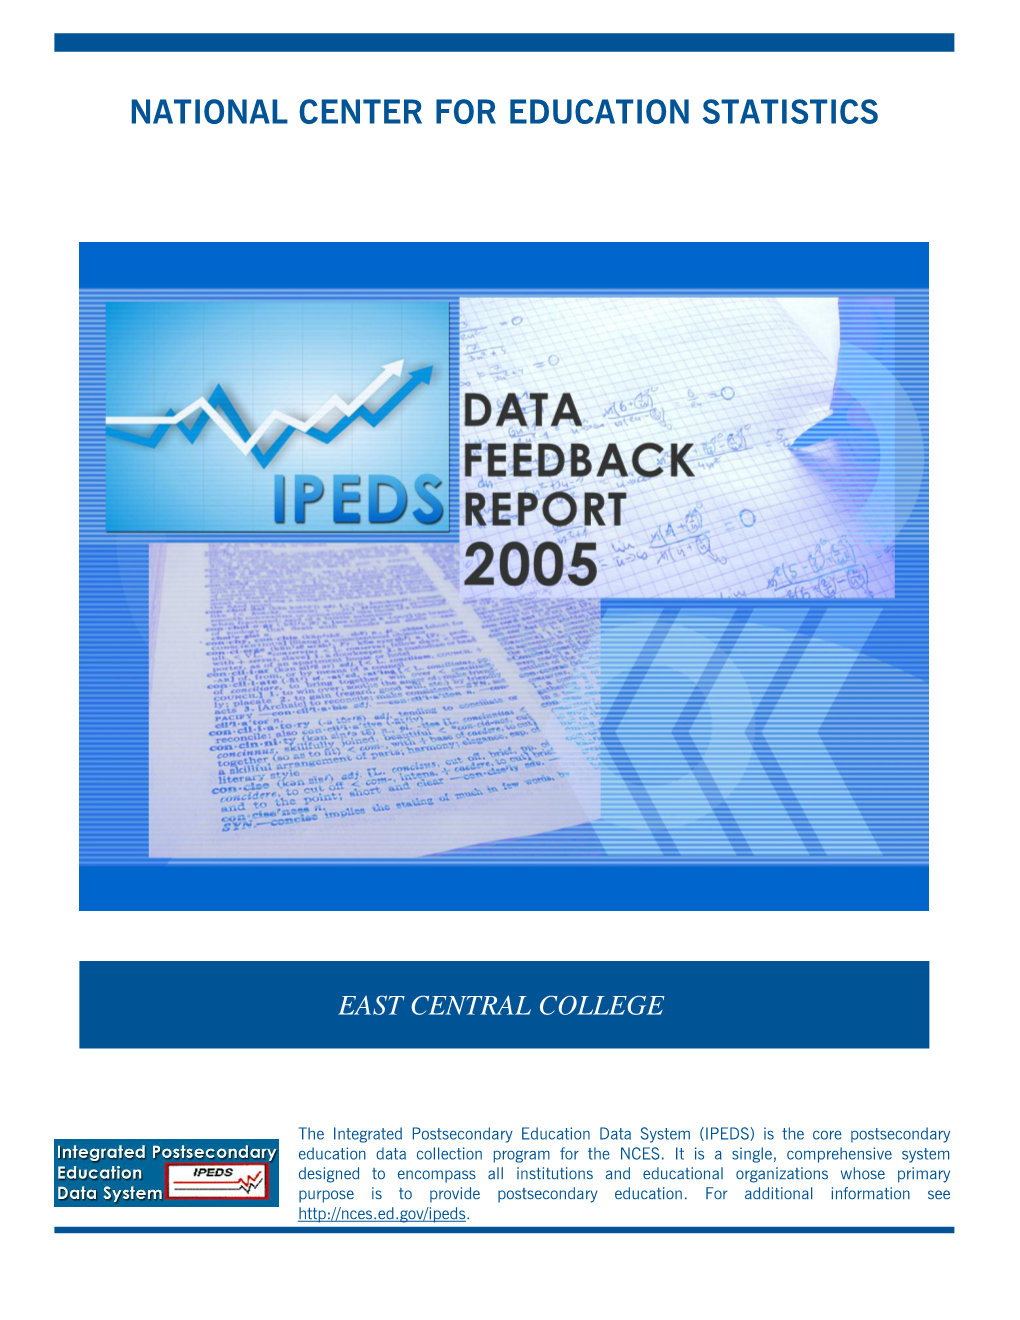 2005 IPEDS Data Feedback Report for EAST CENTRAL COLLEGE